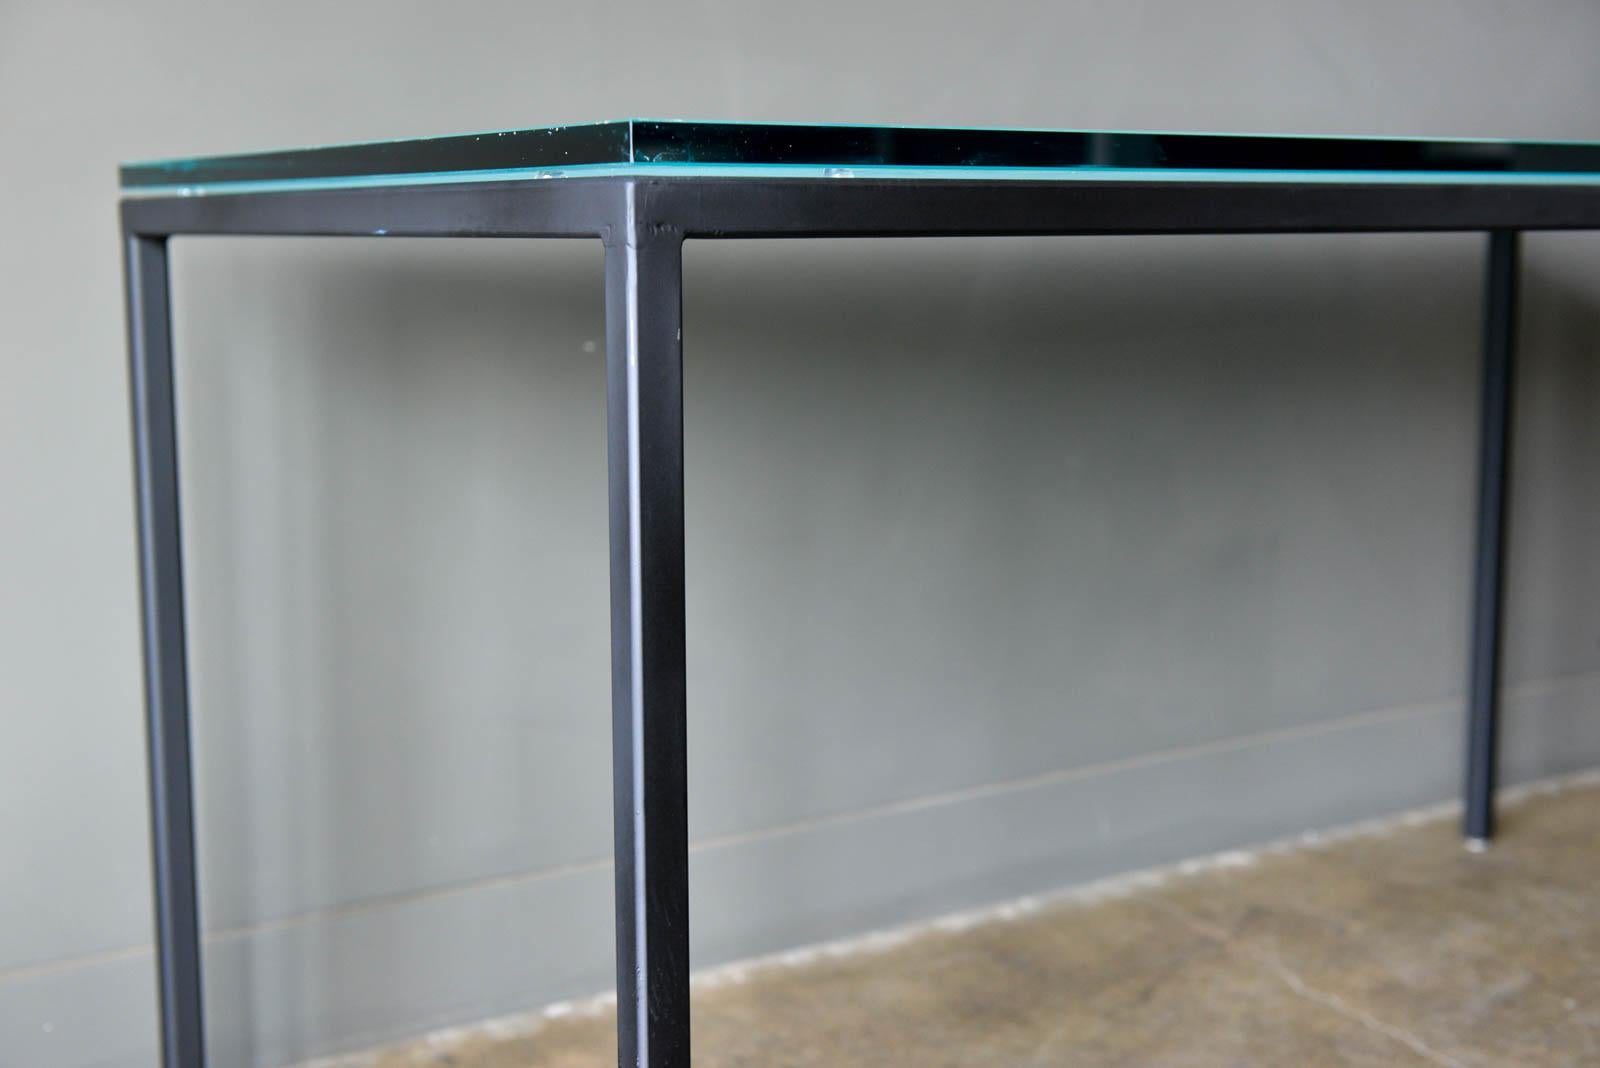 Mid-20th Century Iron and Glass Dining Table or Desk by Darrell Landrum for Avard NYC, 1950 For Sale